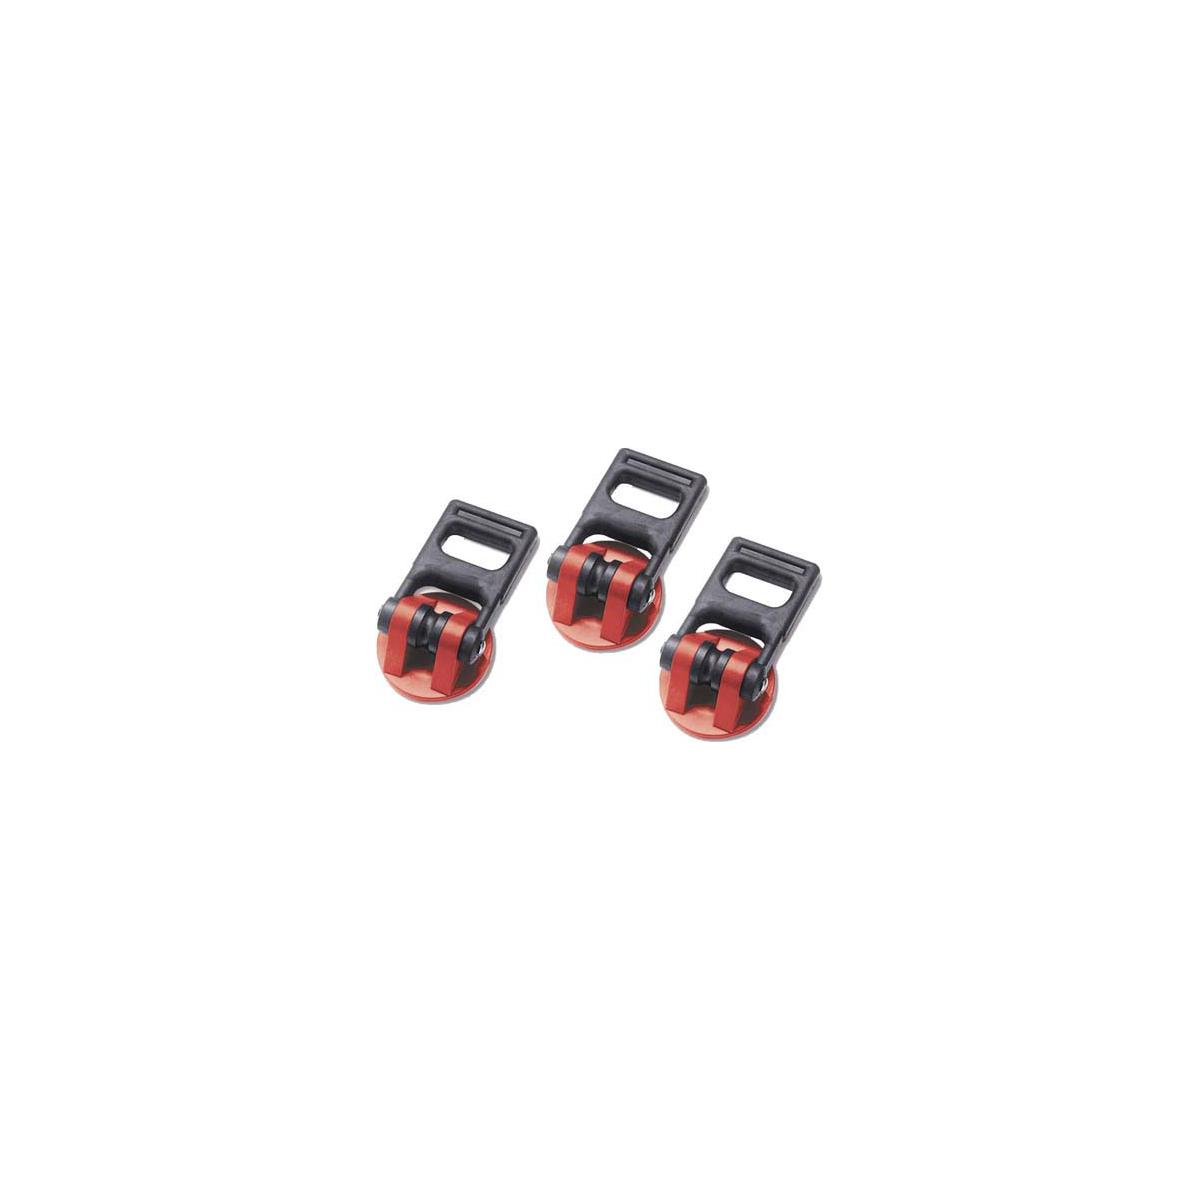 Photos - Other for studios Sachtler Rubber Feet with Locking Device for Tripods S-7004 